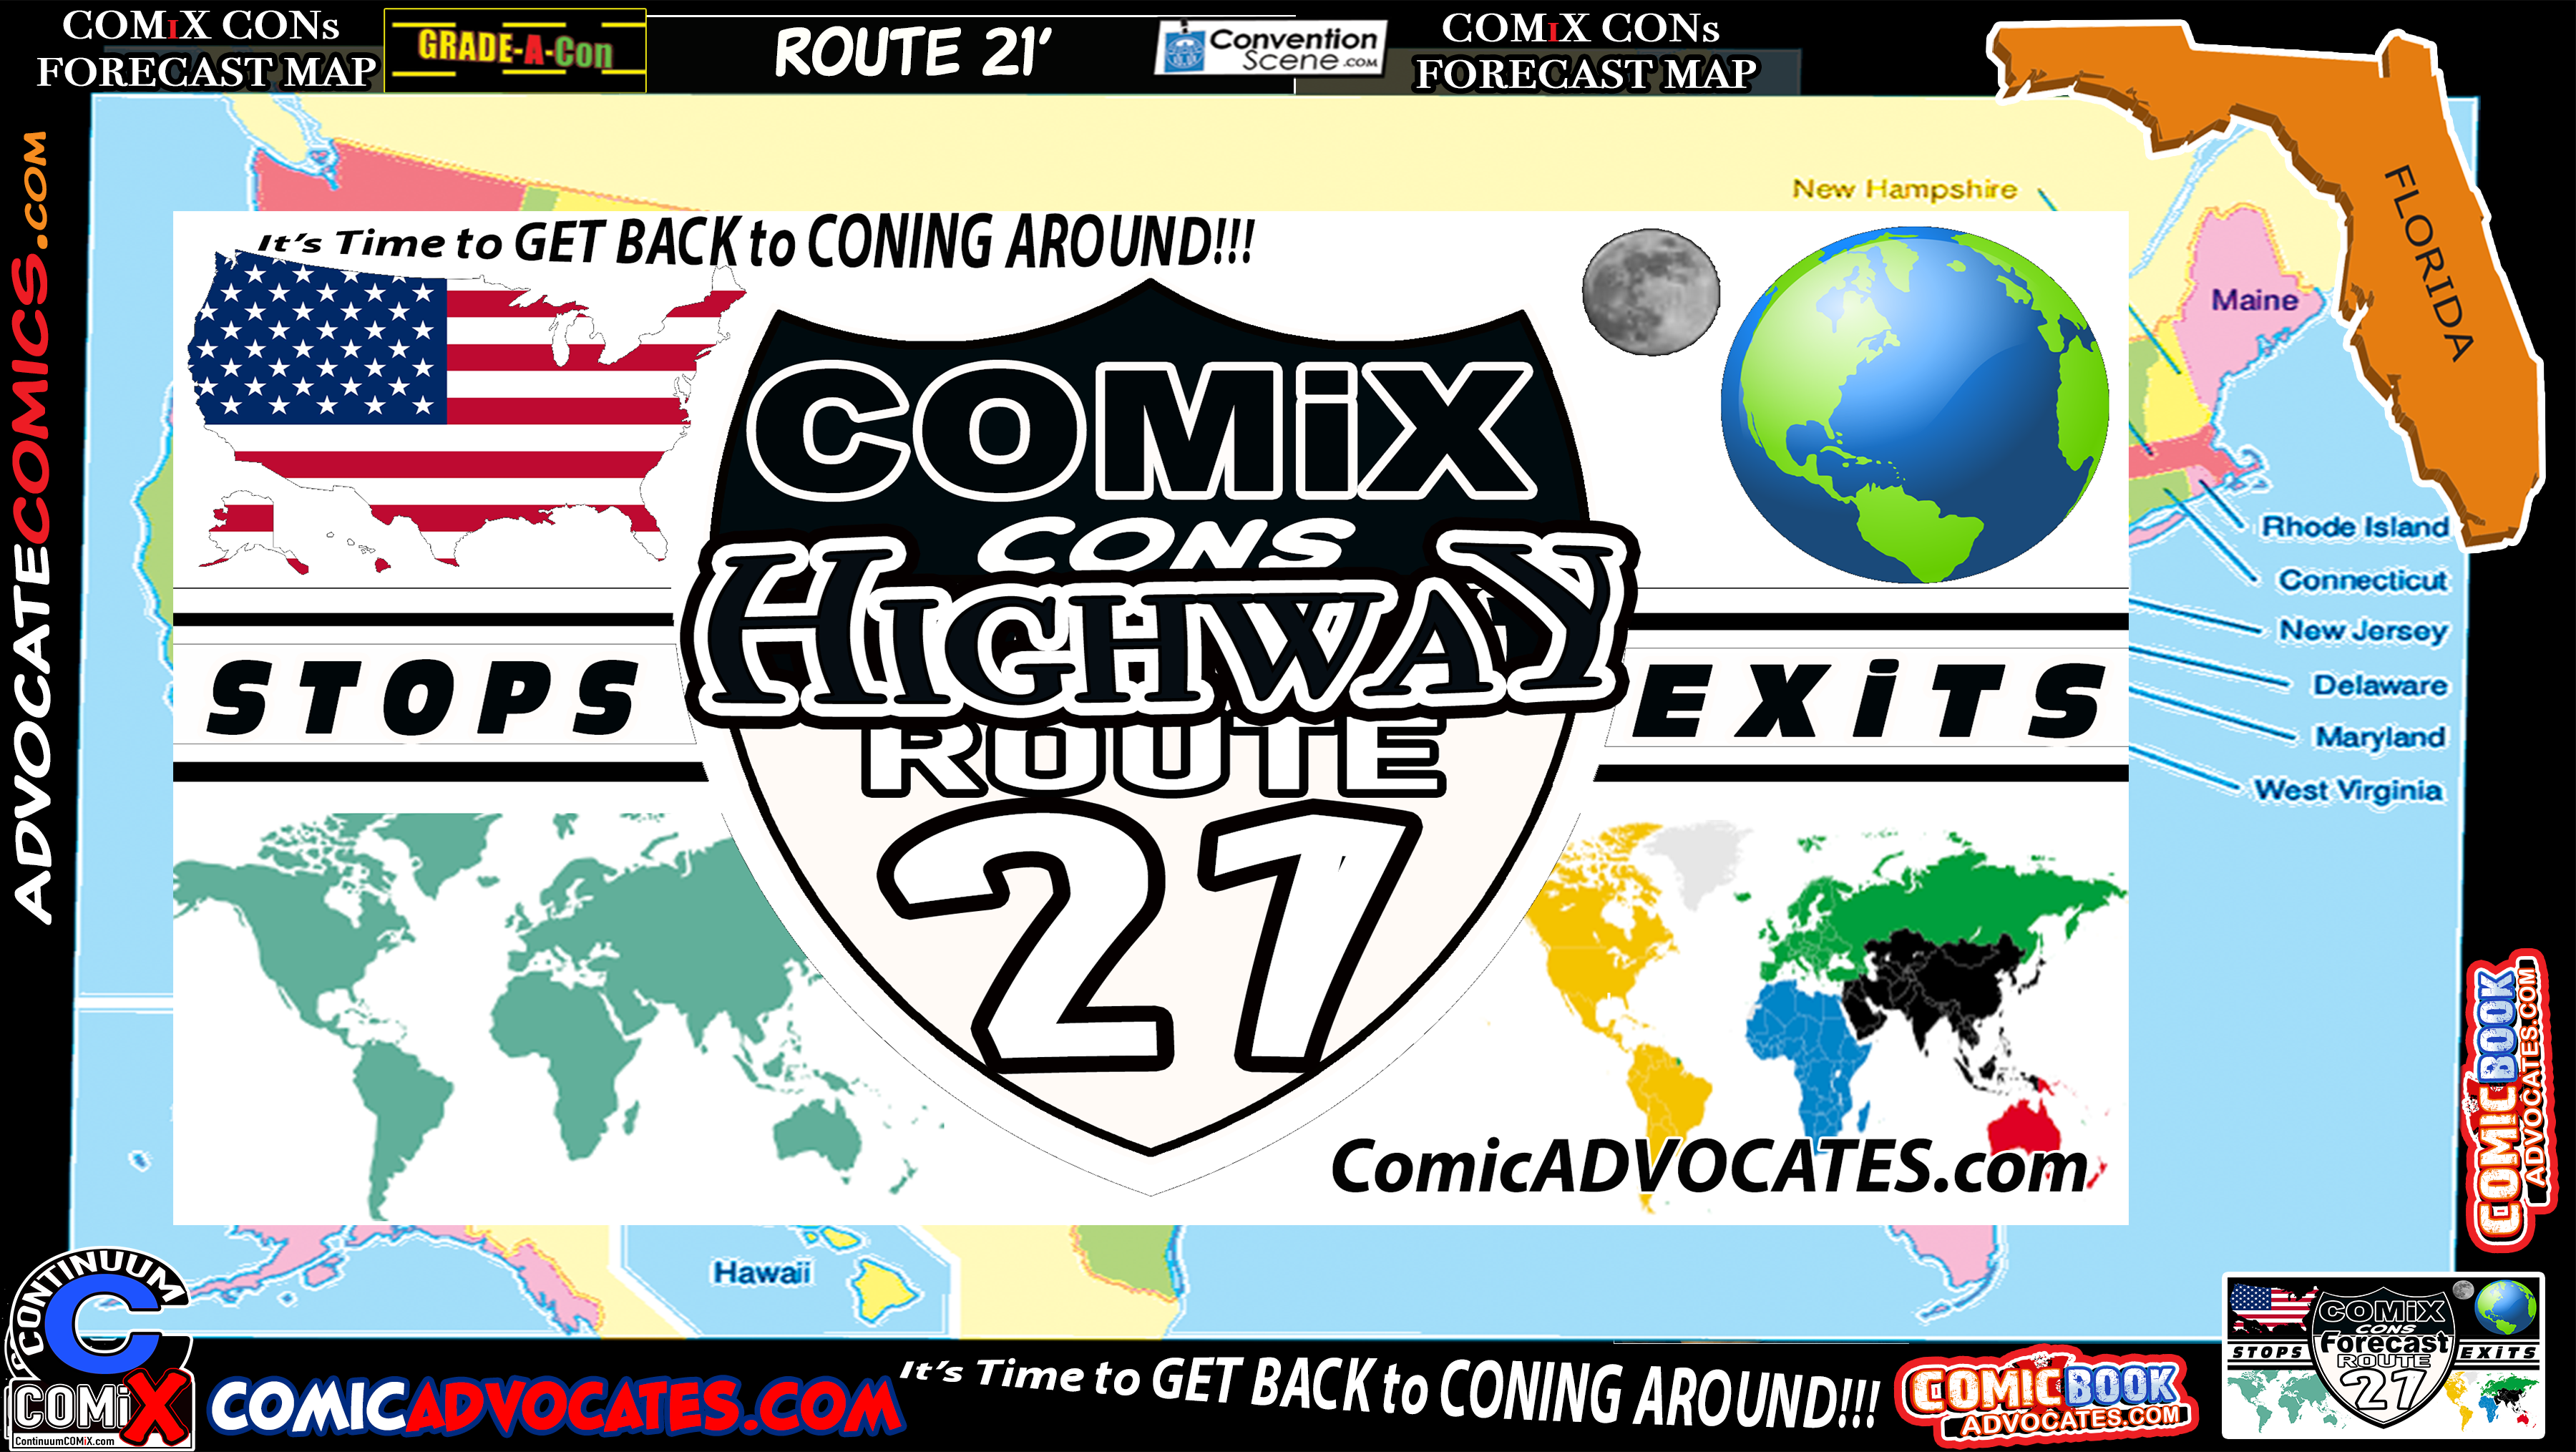 The COMiXcon ForeCast WEEK 41 The COMiXcon ForeCast WEEK 41- Motors, 3 Rivers, Wizards, Primack Art & More